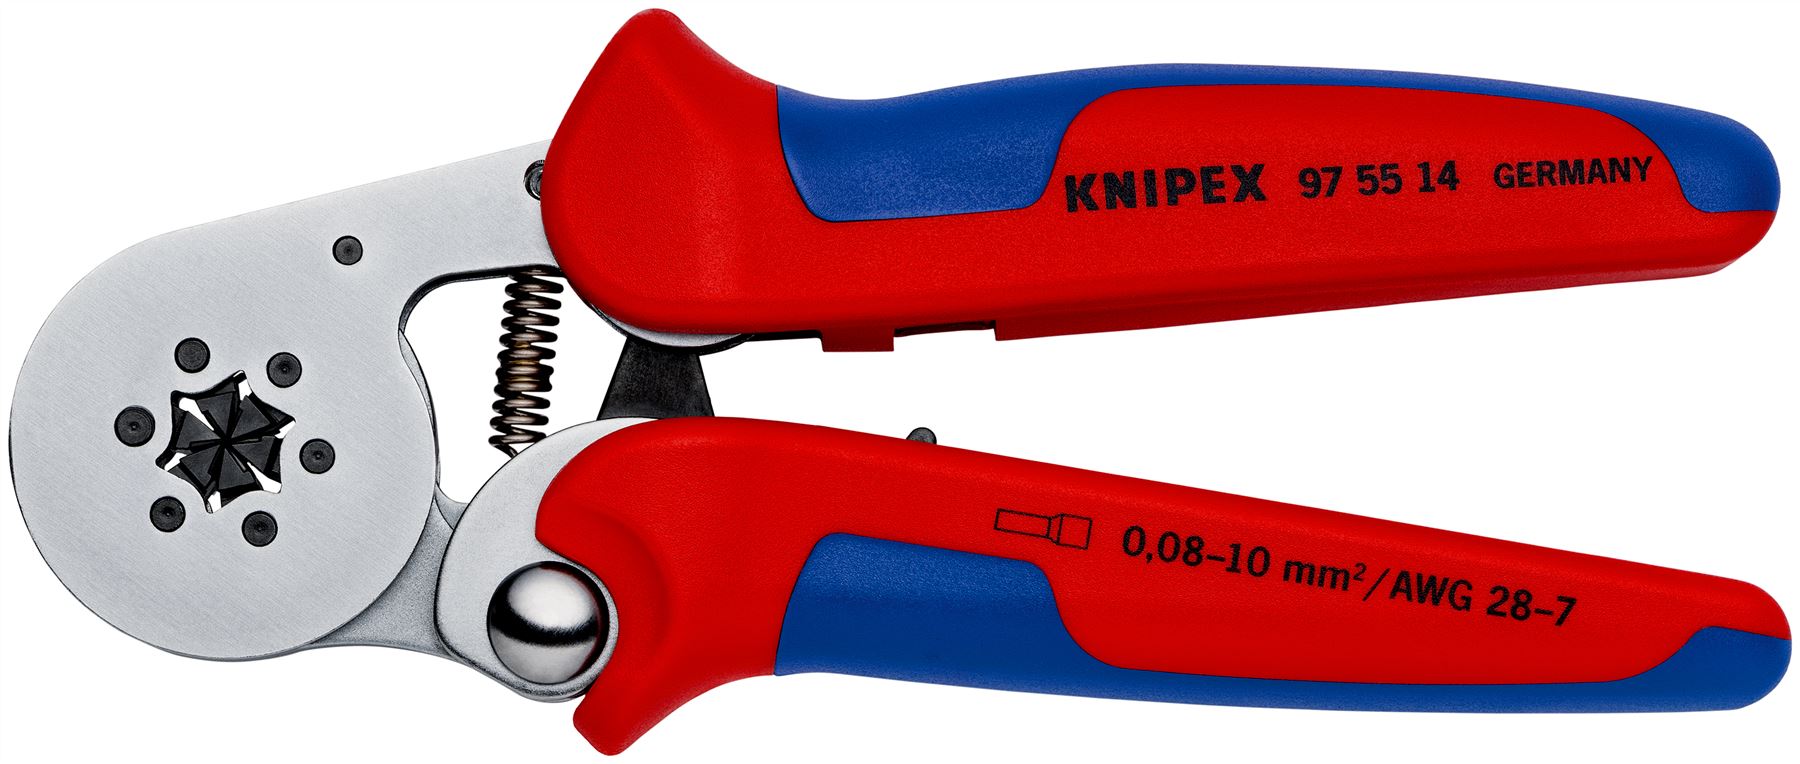 Knipex Self Adjusting Electricians Crimping Pliers for Wire Ferrules 0.08-10mm² 28-8 AWG 95 55 14